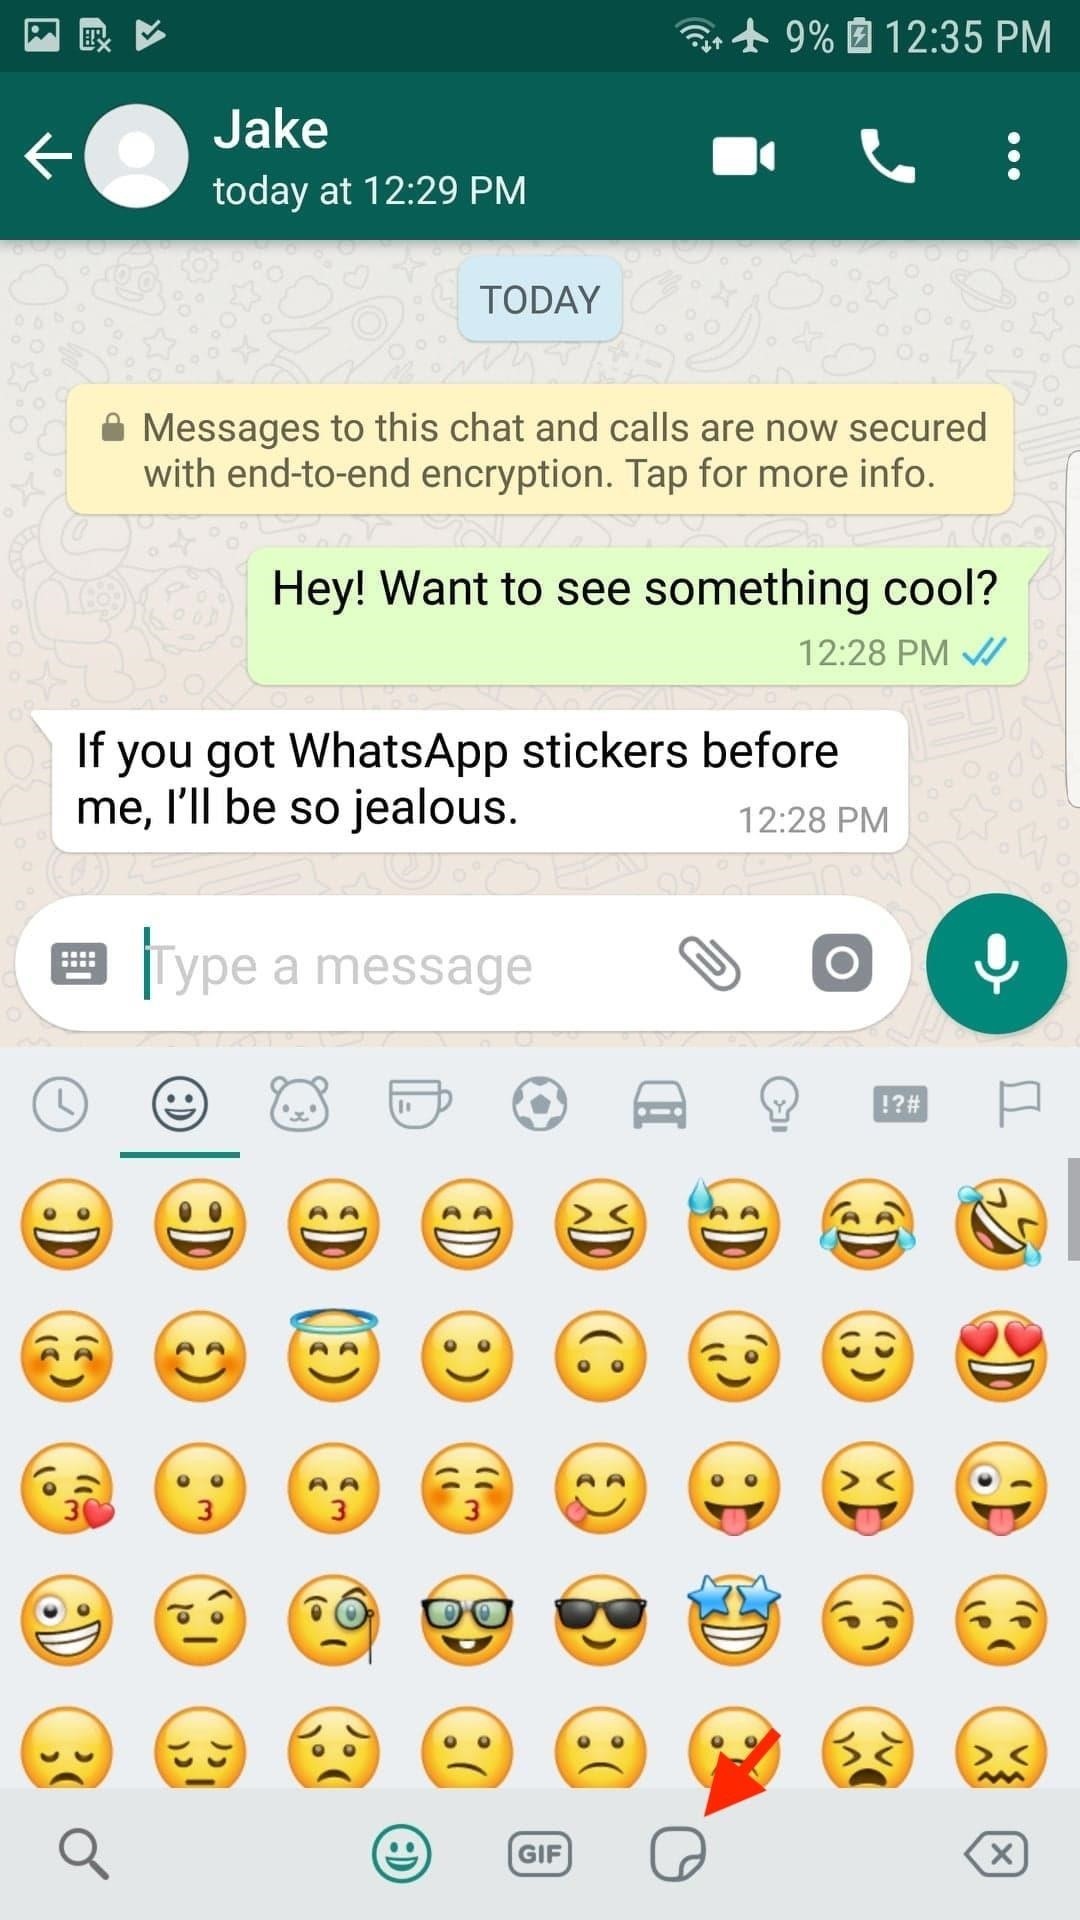 Personalize Your Messages with Stickers in WhatsApp